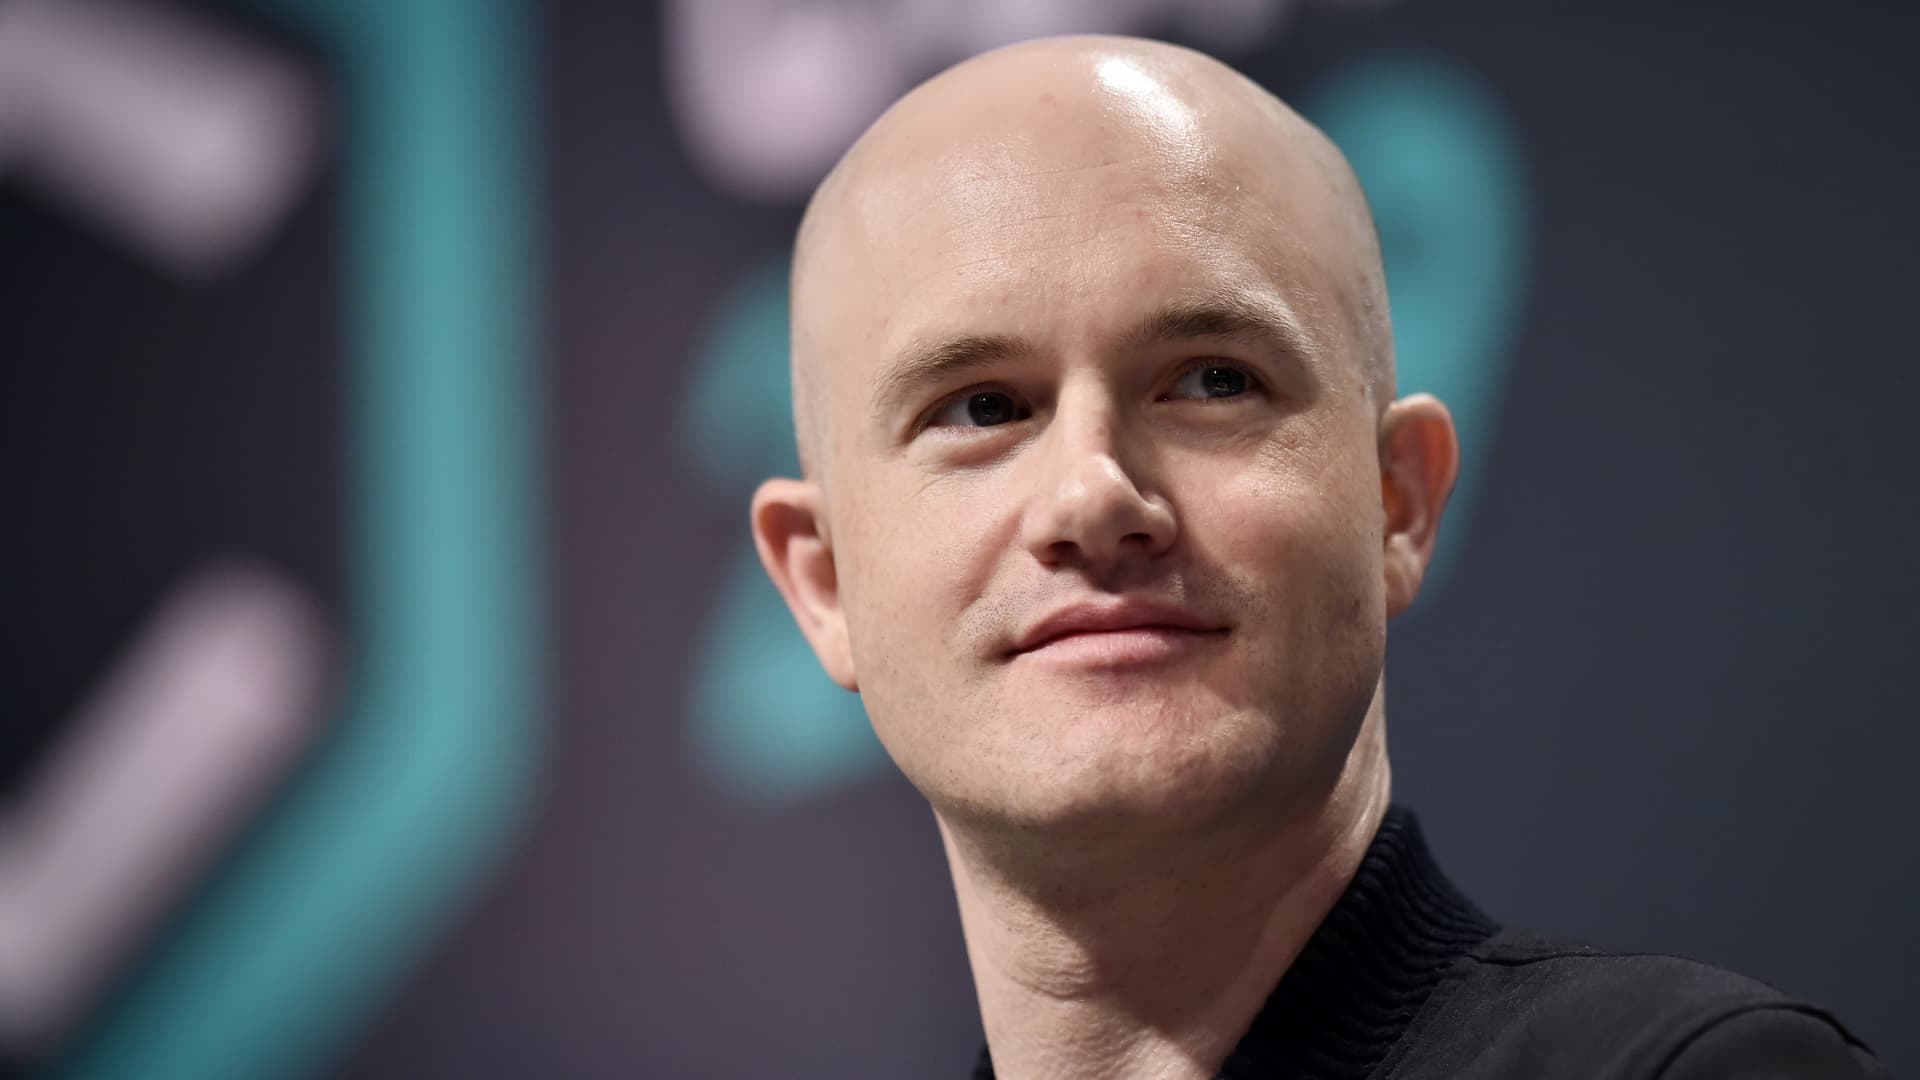 Op-ed: Crypto markets need regulation to avoid more washouts like FTX says Coinbase CEO Brian Armstrong – CNBC